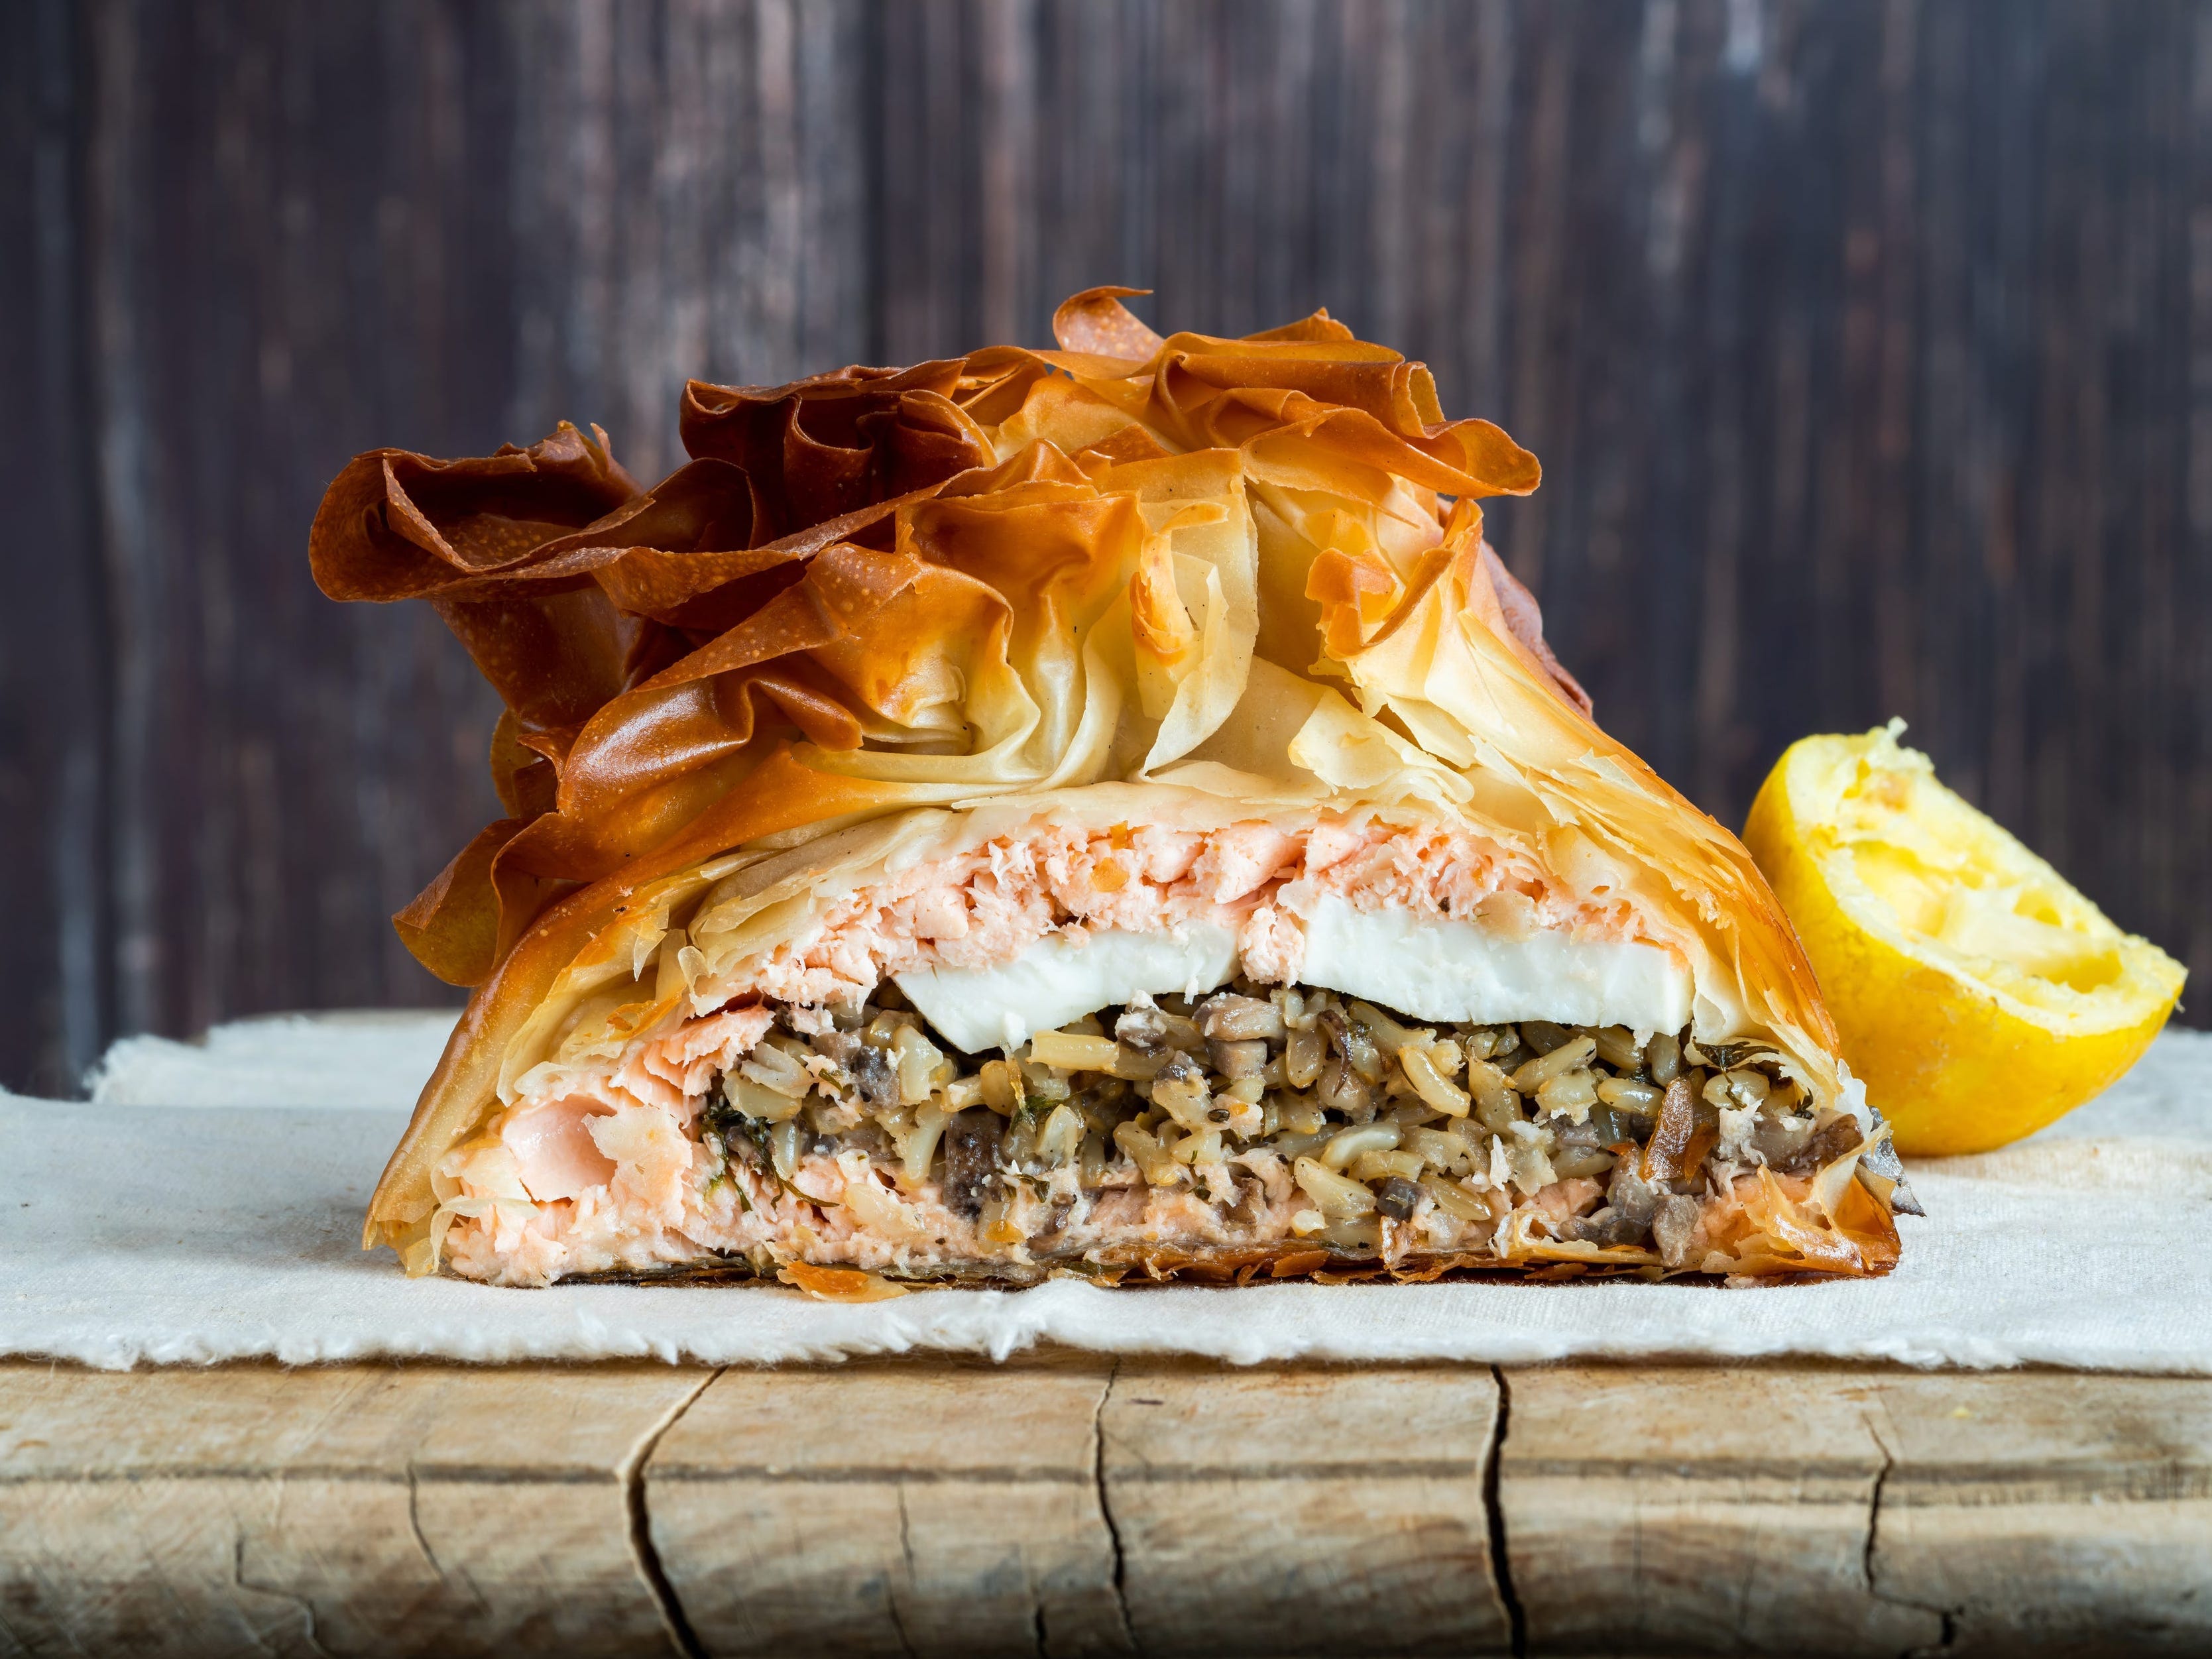 <p>This Russian specialty makes for a stunning centerpiece. </p><p><a href="https://www.bbcgoodfood.com/recipes/salmon-coulibiac">According to BBC Good Food</a>, coulibiac is filled with fish, rice, onions, dill, and spices like cumin, coriander seeds, cardamom, and star anise. </p><p><a href="https://www.nytimes.com/1976/12/27/archives/westchester-weekly-to-my-mind-the-worlds-greatest-dish-coulibiac.html">According to the New York Times</a>, the pie is almost always baked in a brioche or pastry shell.</p>